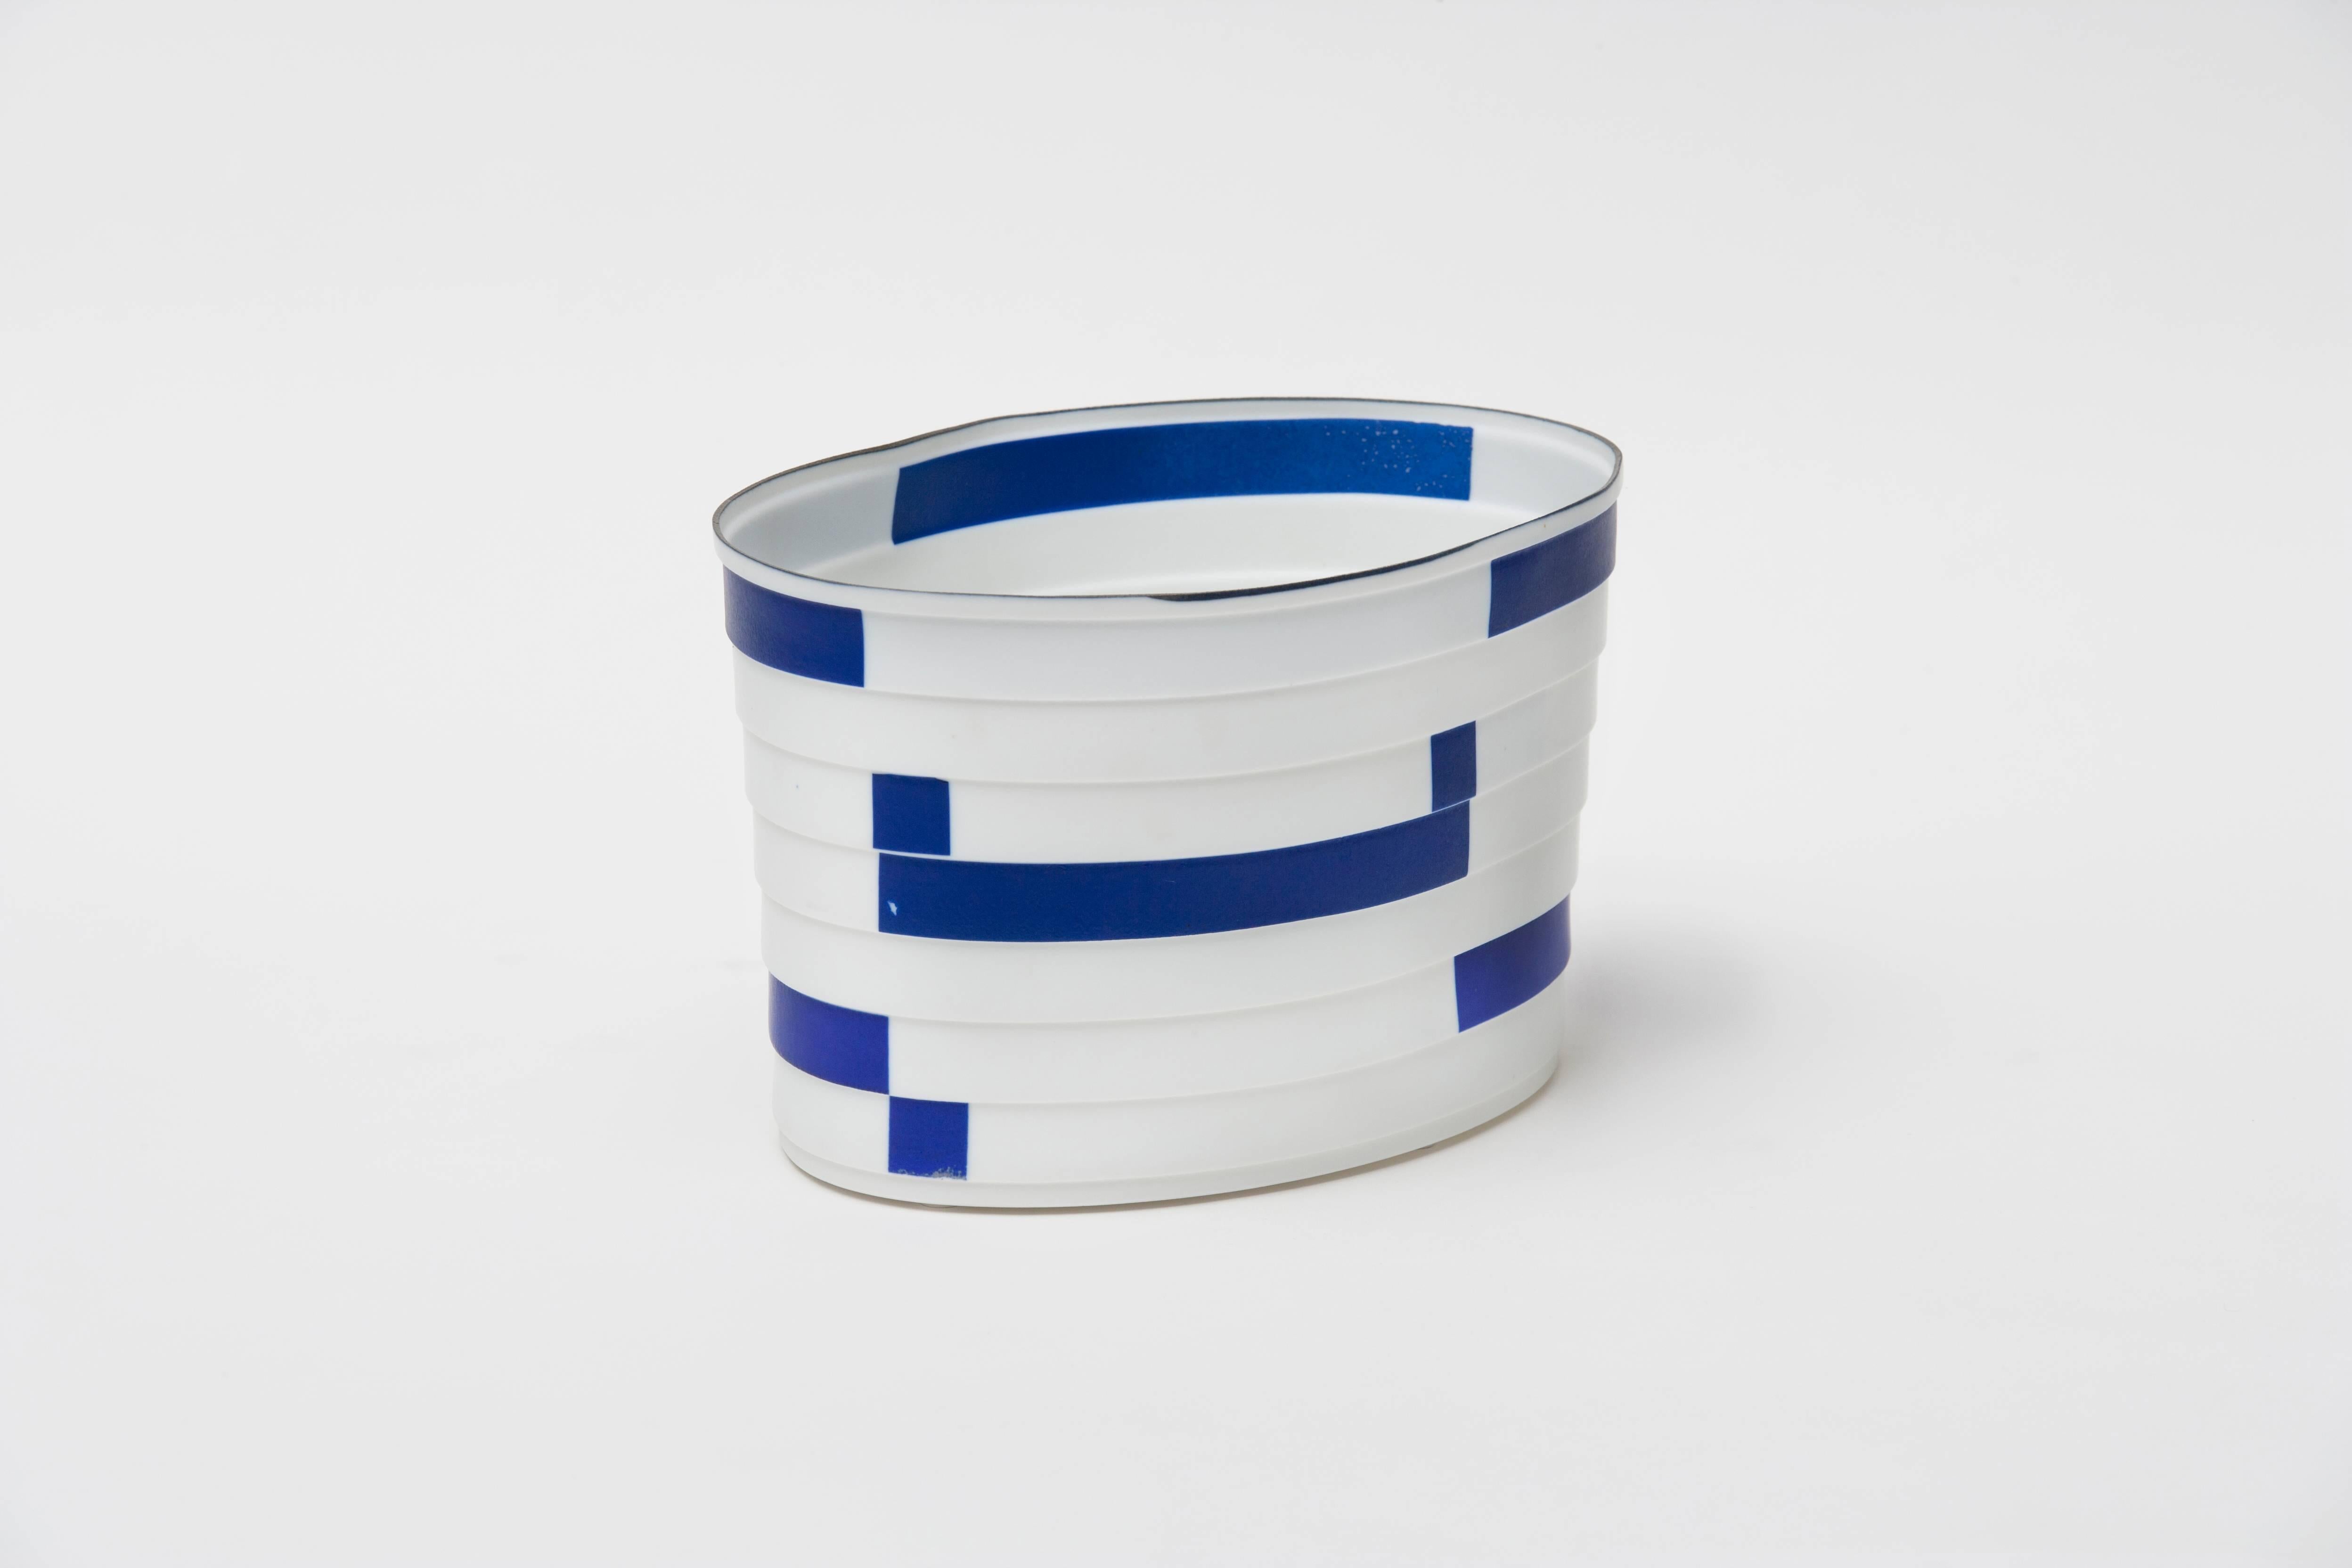 Bodil Manz, porcelain vessel in white, blue, and black, made in Denmark 1